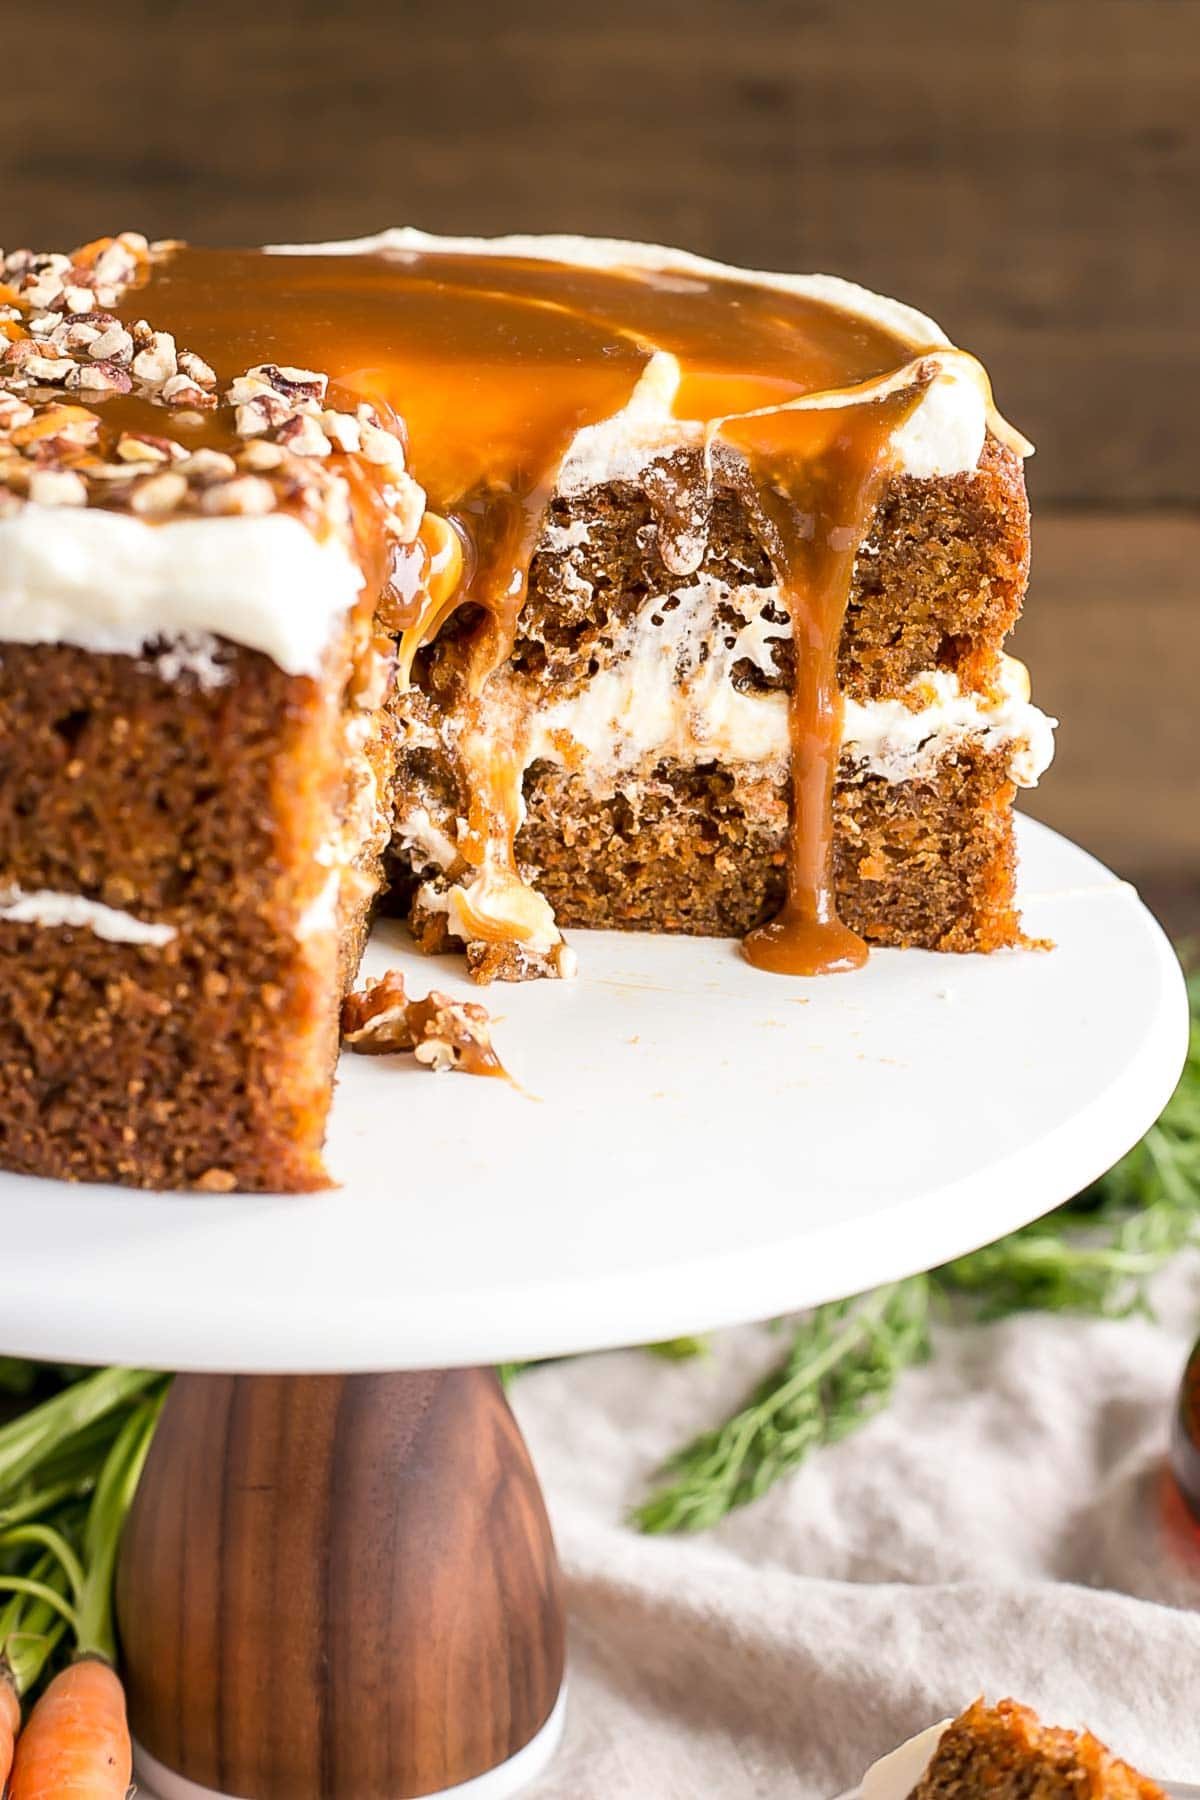 Layered round carrot cake with caramel dripping off of it.